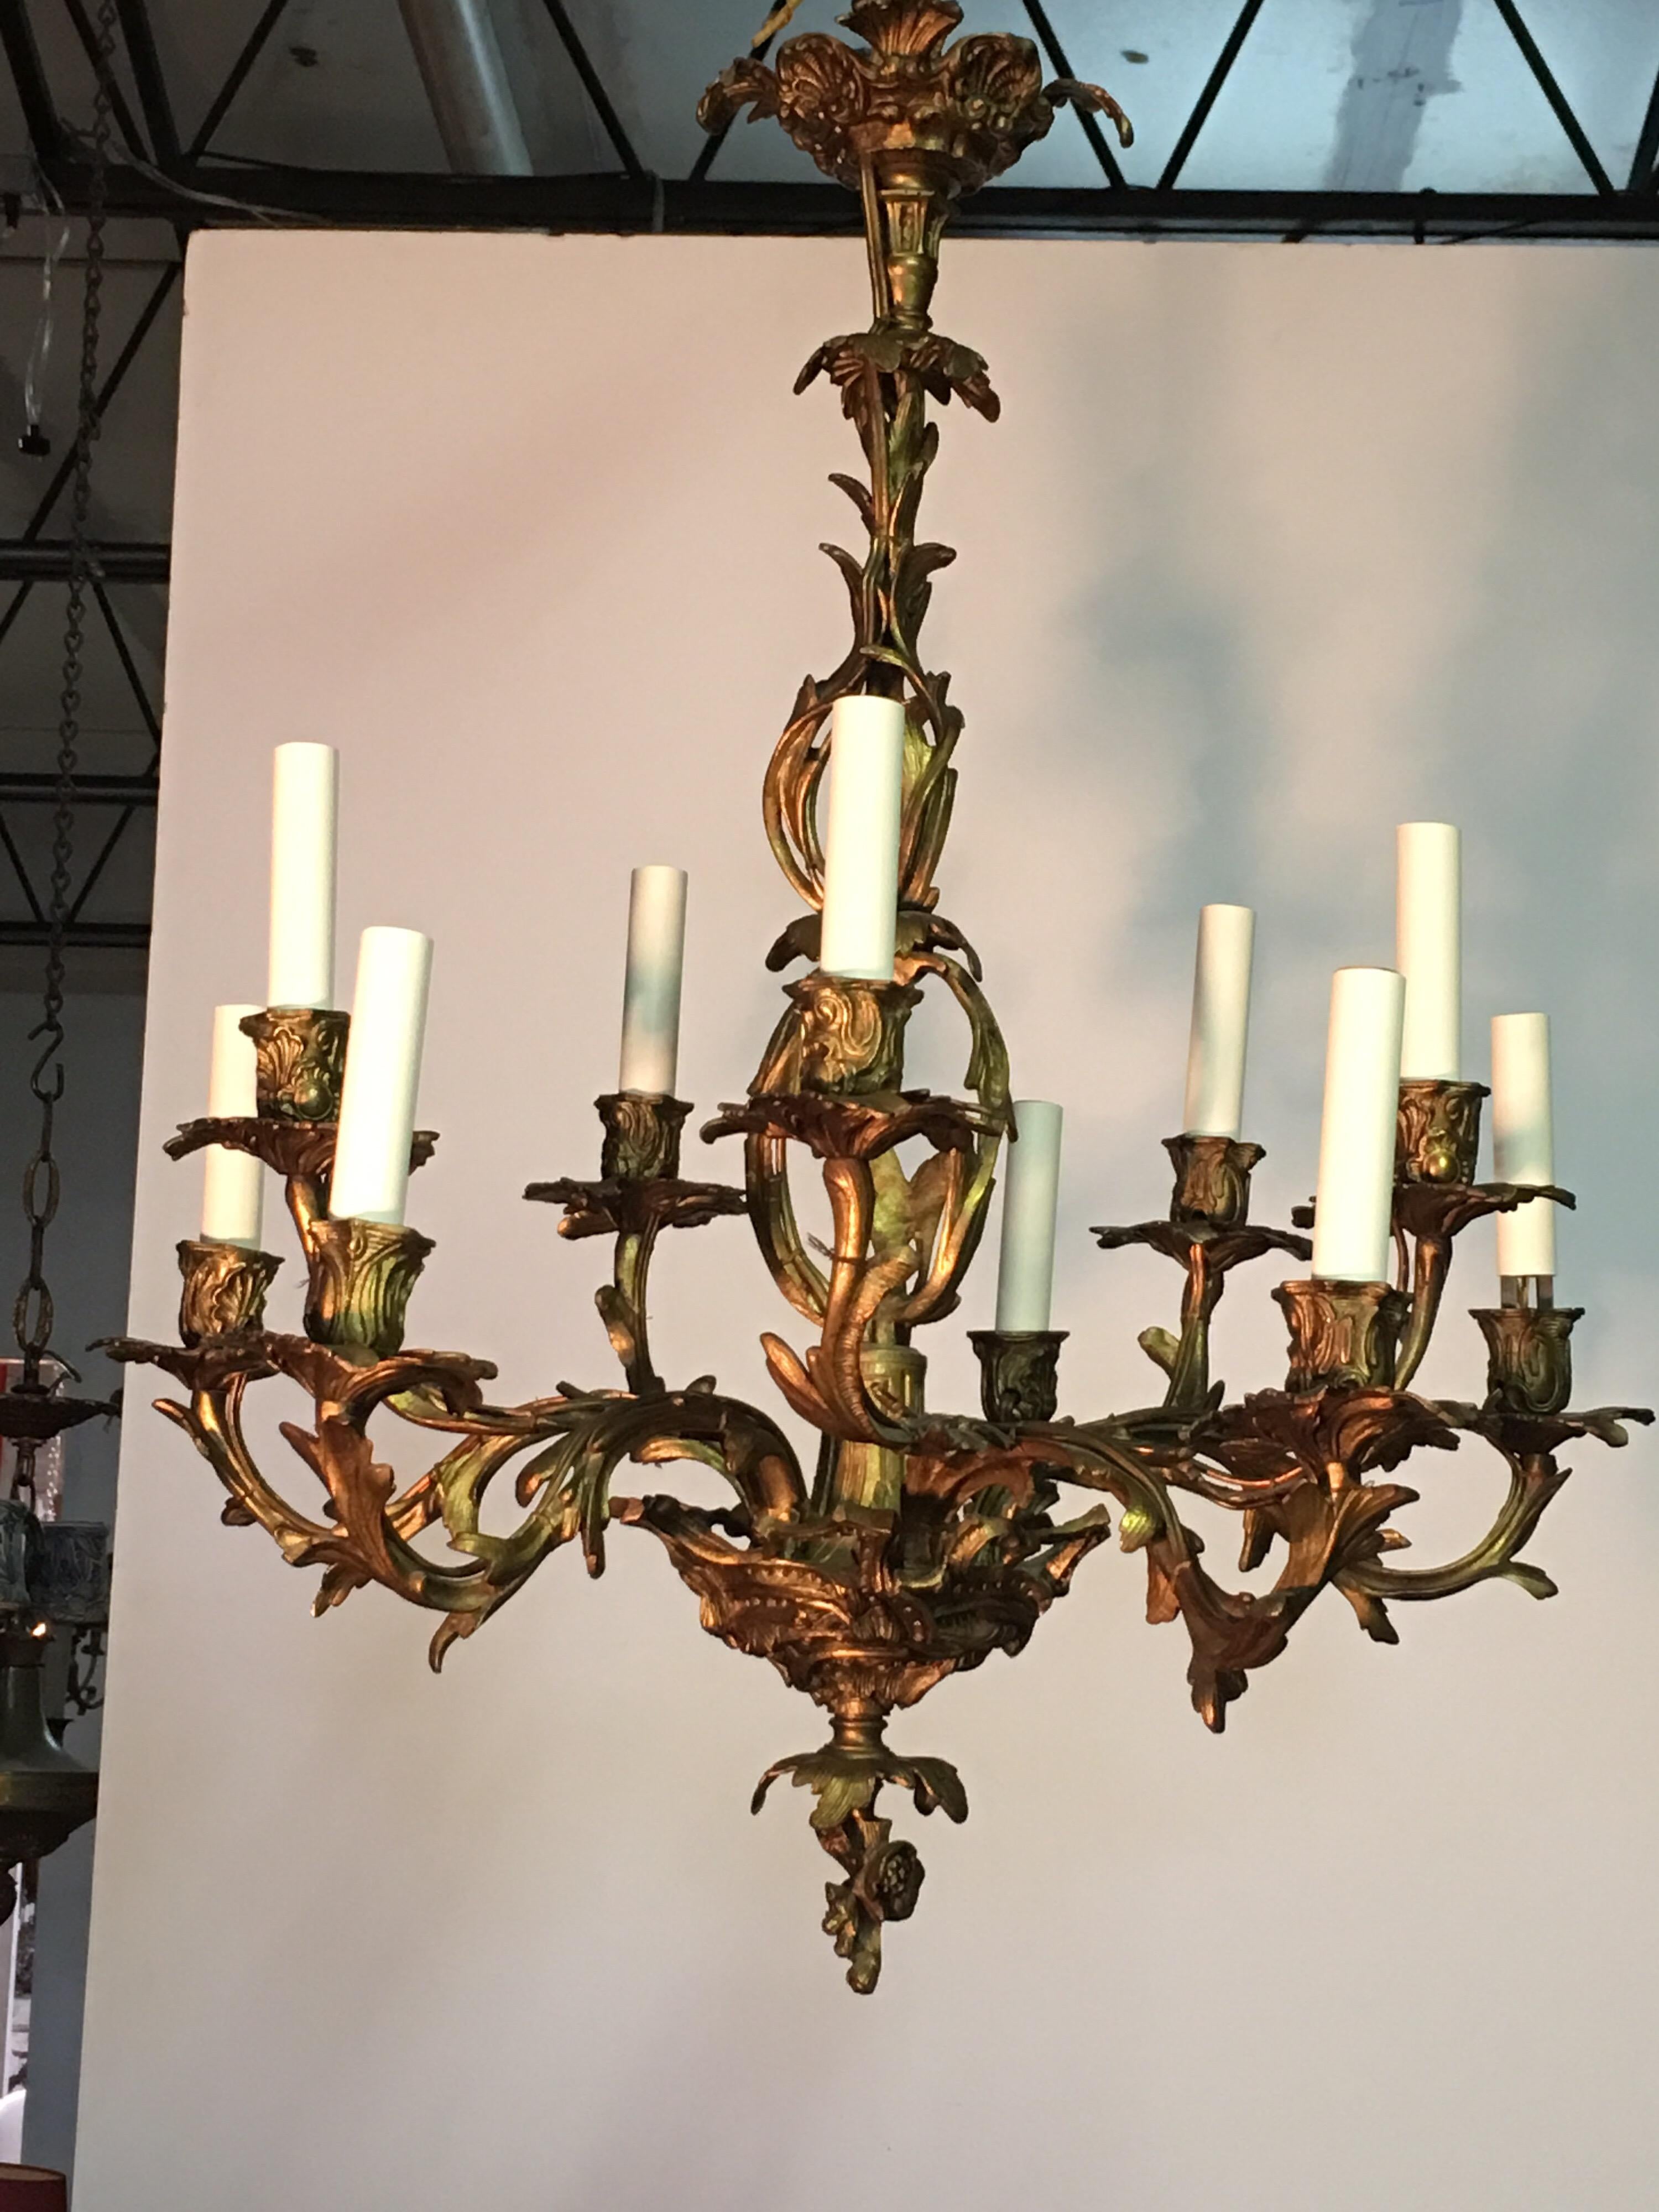 French Louis XV style bronze chandelier from the late 19th century. This Rococo style ten-light chandelier is cast bronze and has an asymmetrical foliage motif throughout. The scale of the chandelier allows its use in various locations.